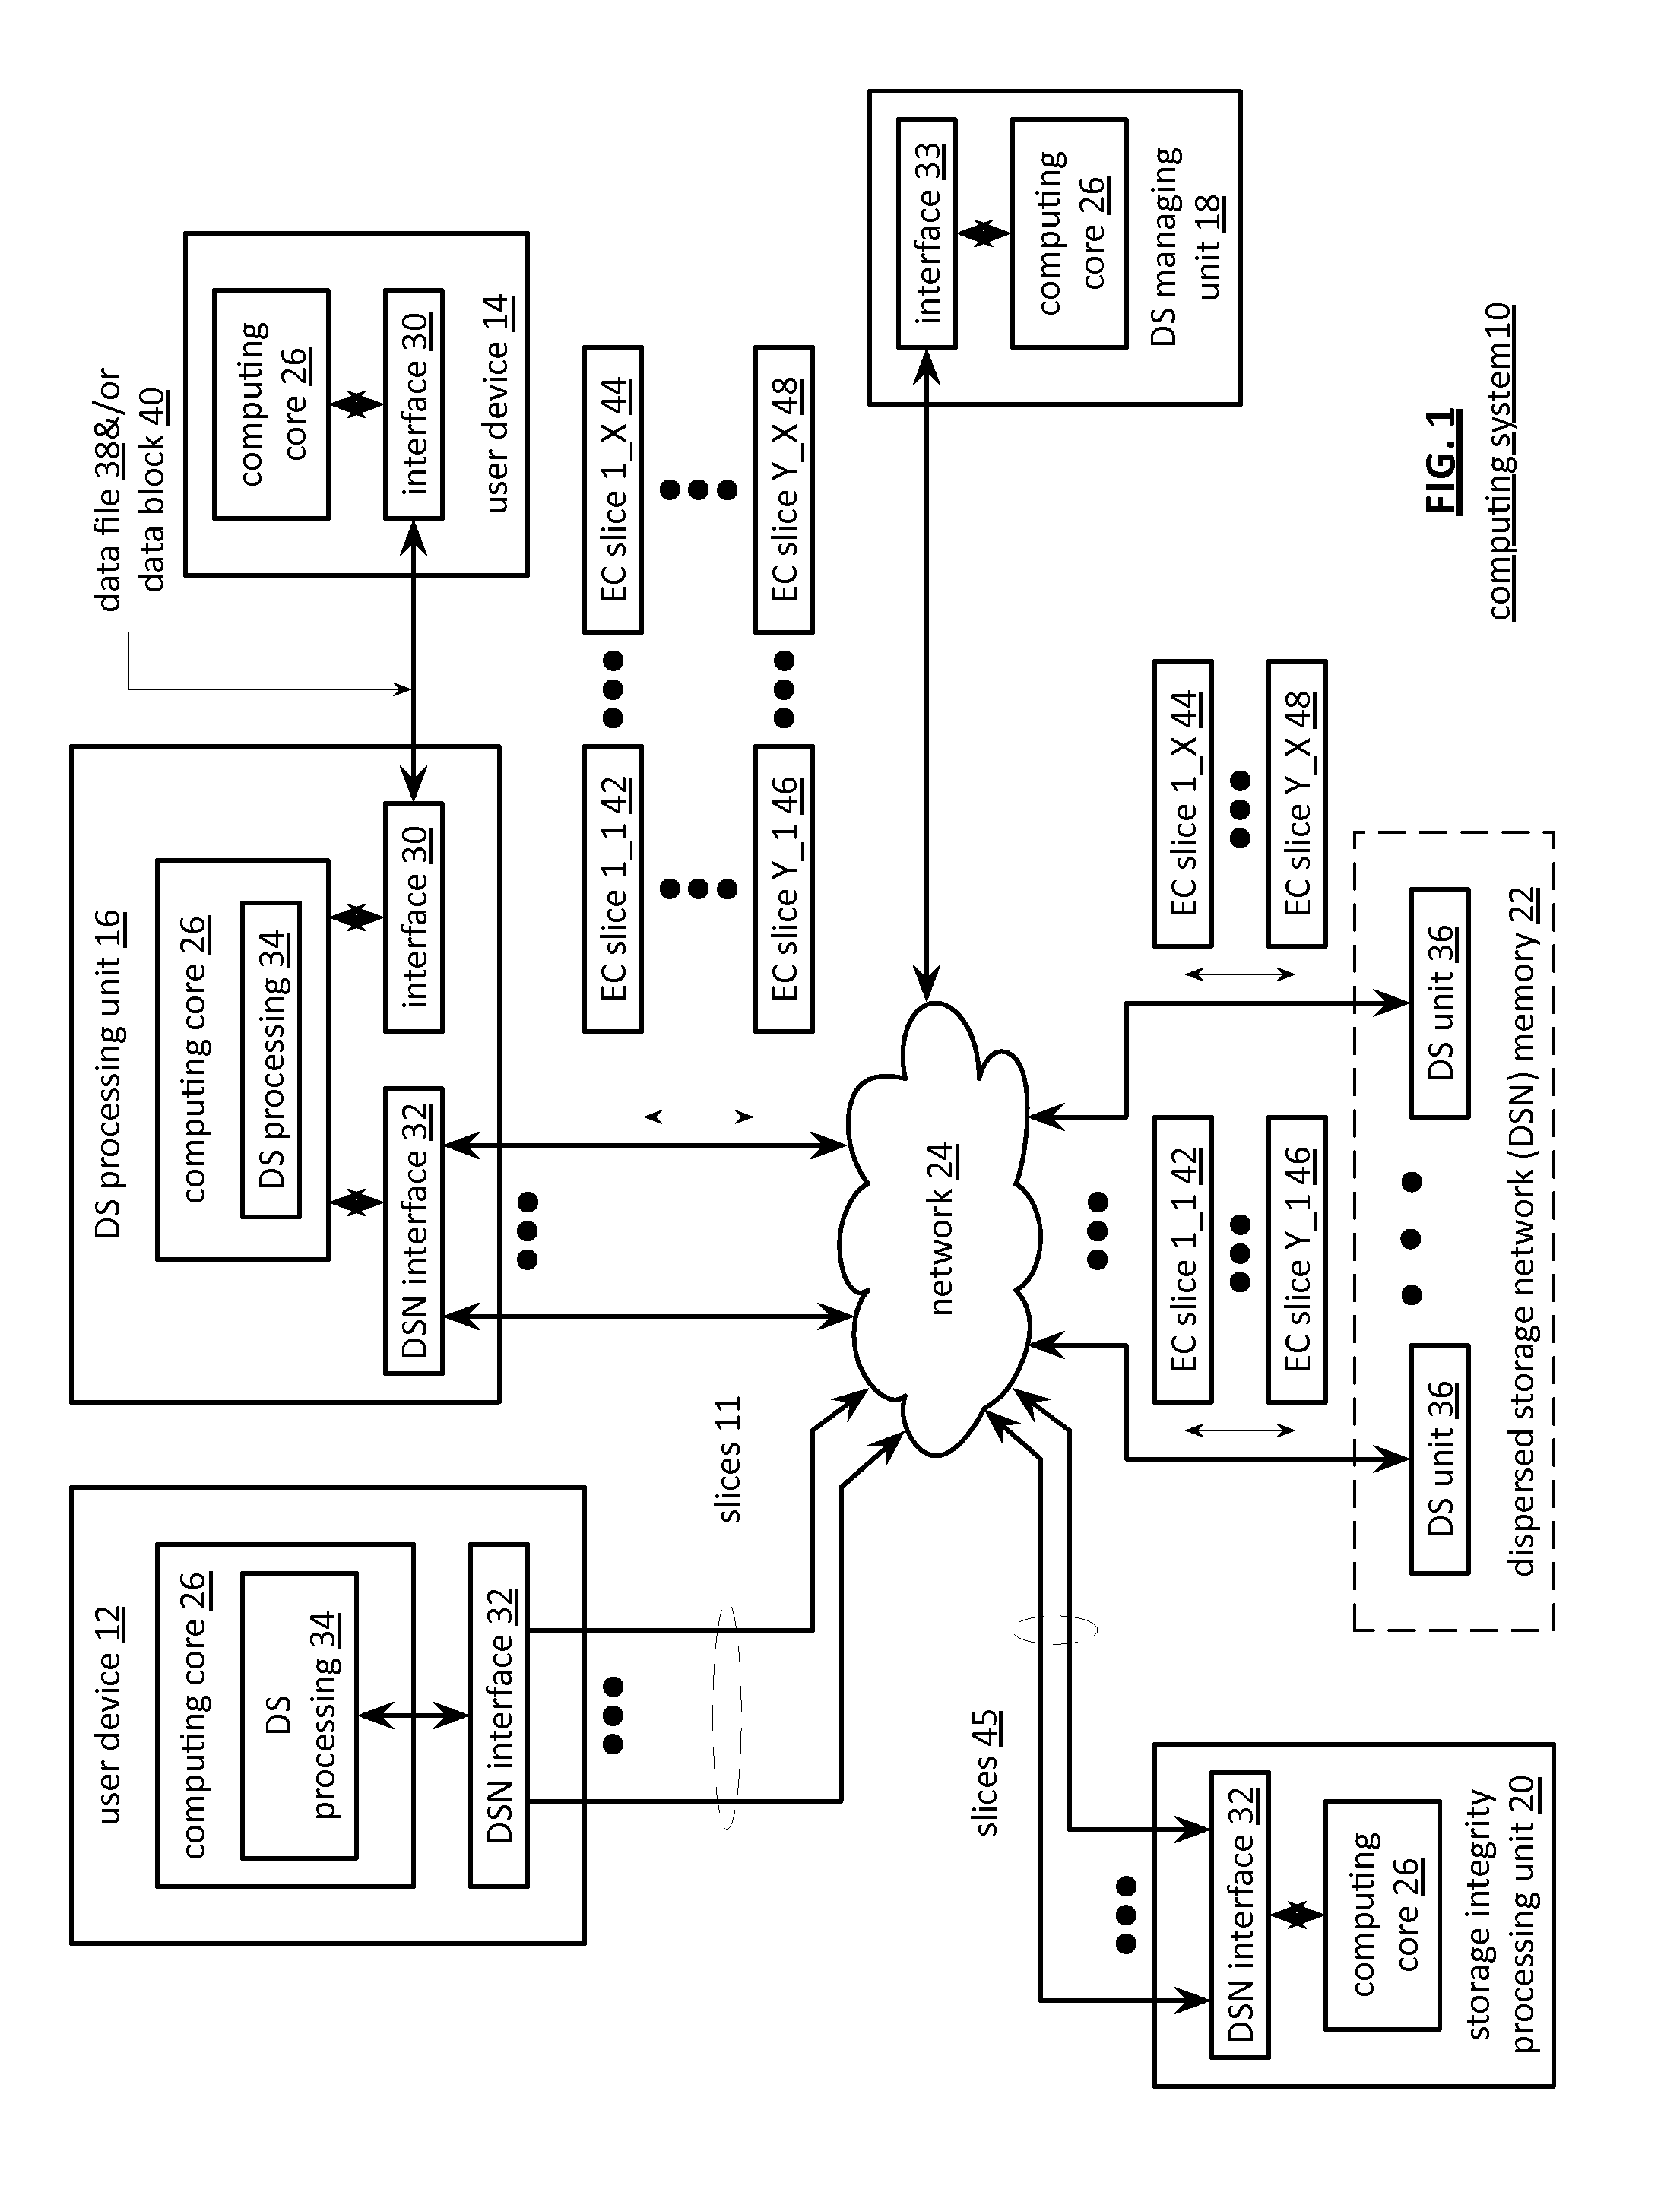 Coordinated retrieval of data from a dispersed storage network